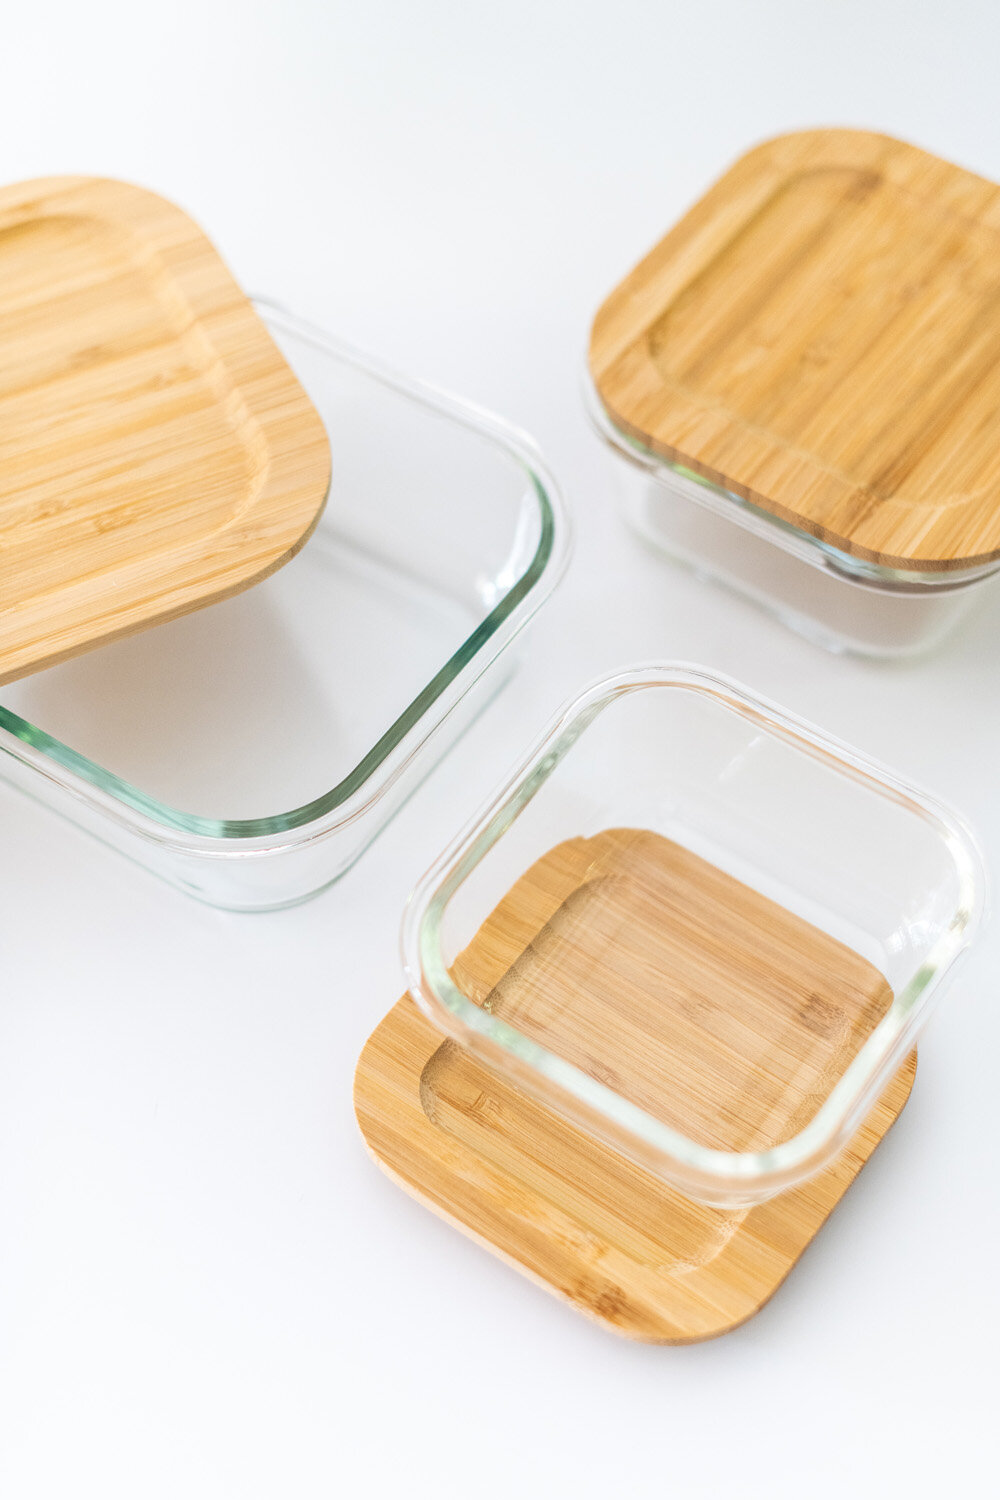 The Bundle - 9 Piece Set - Glass Storage Containers With Bamboo